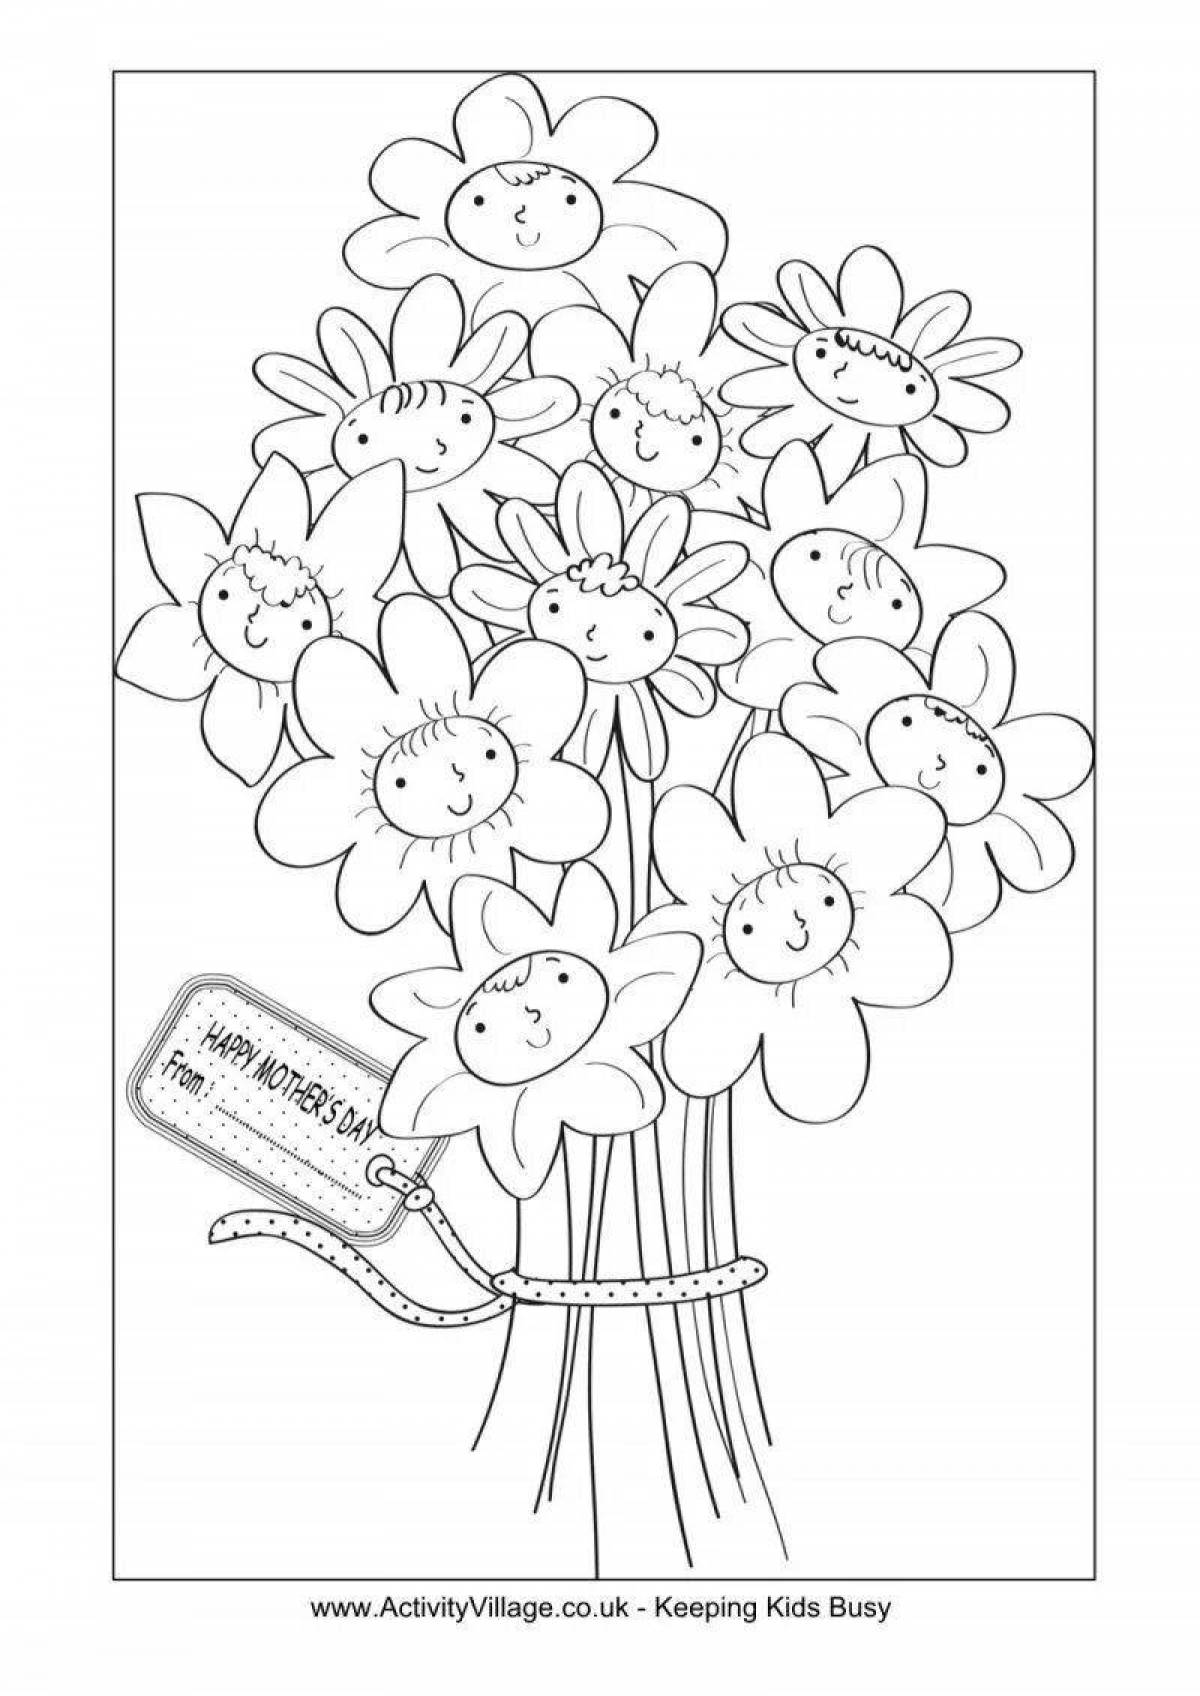 Exquisite mother's day card coloring page